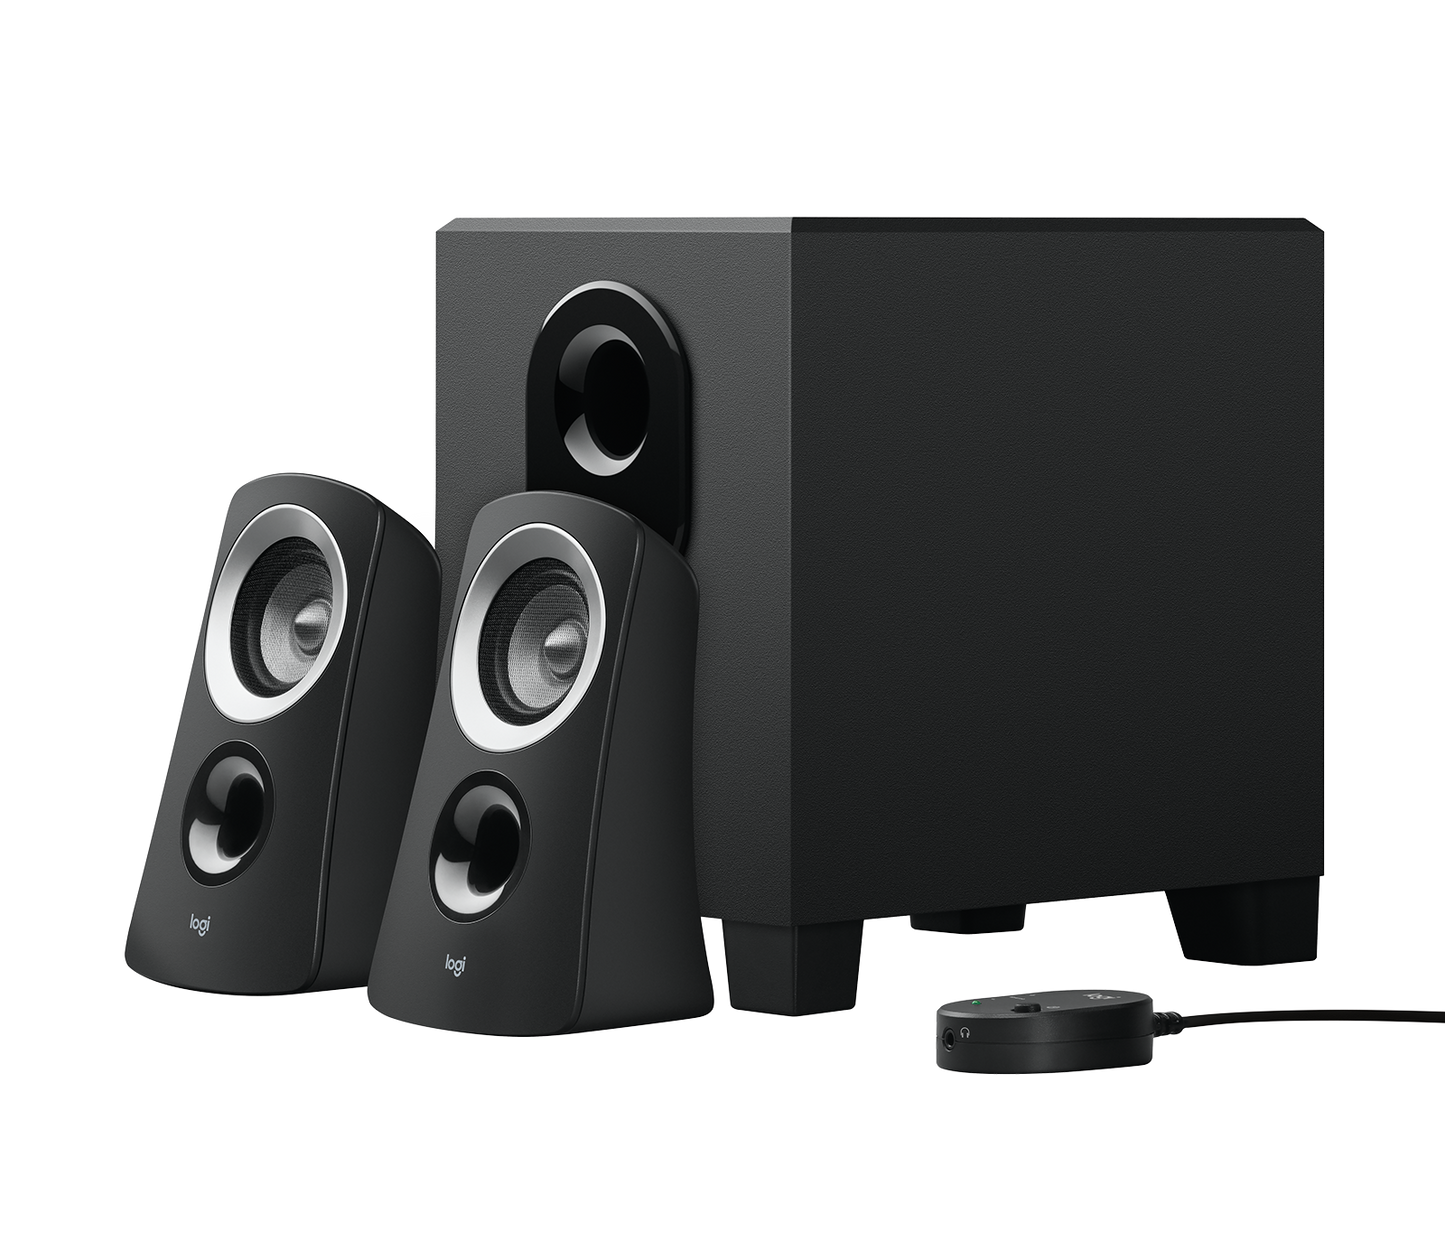 Logitech Z313 2.1 Speakers with Subwoofer